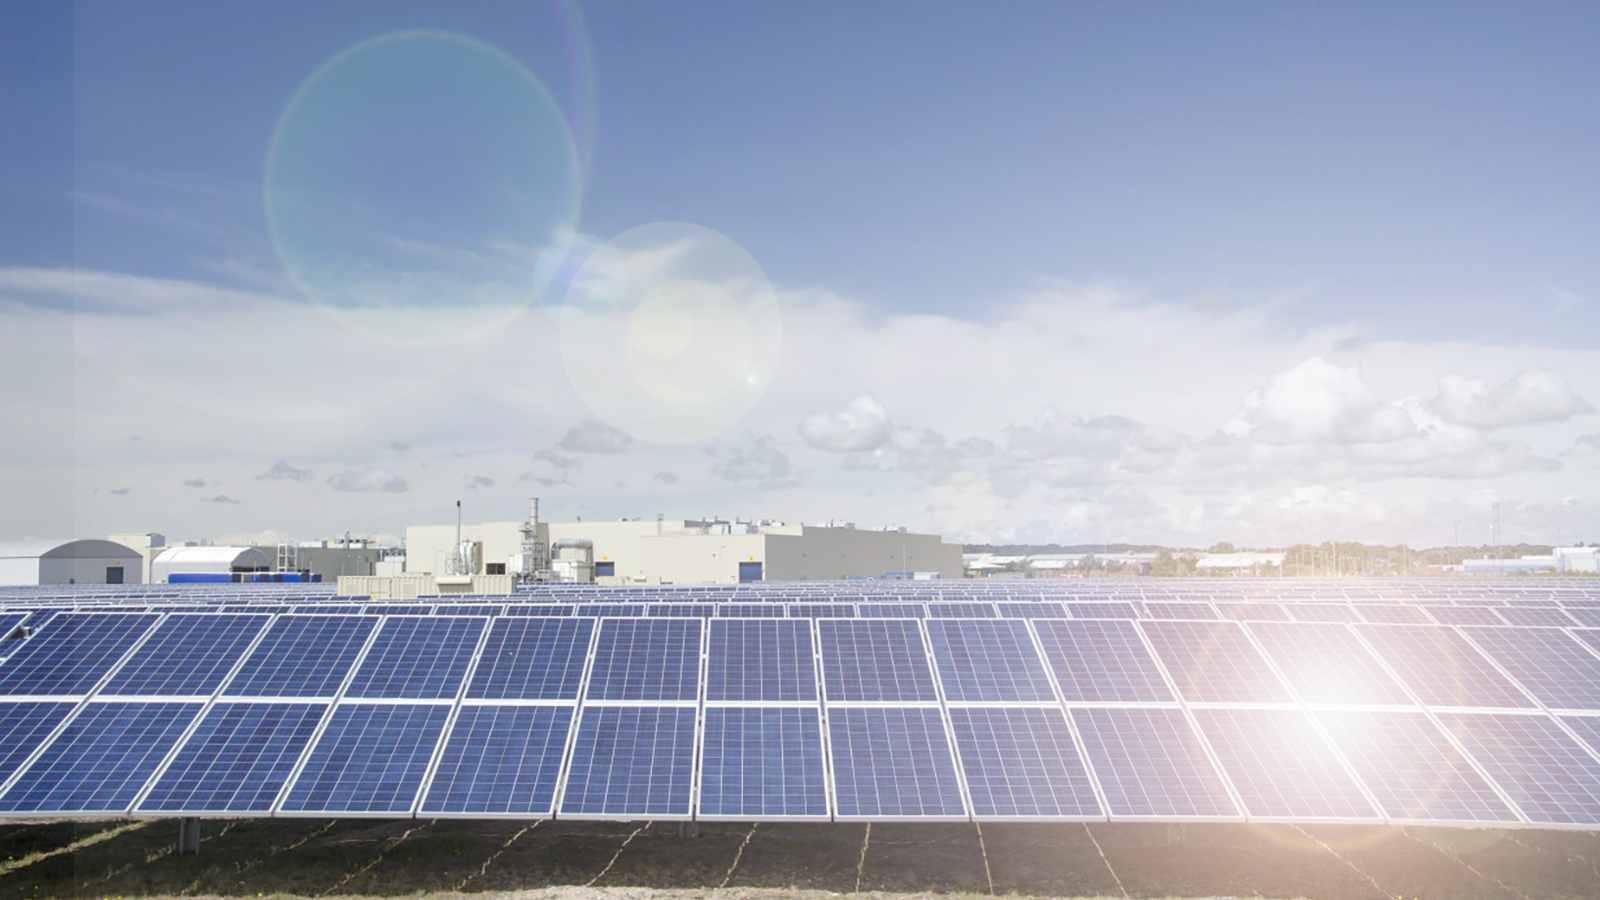 How do we use green energy to power our warehouses